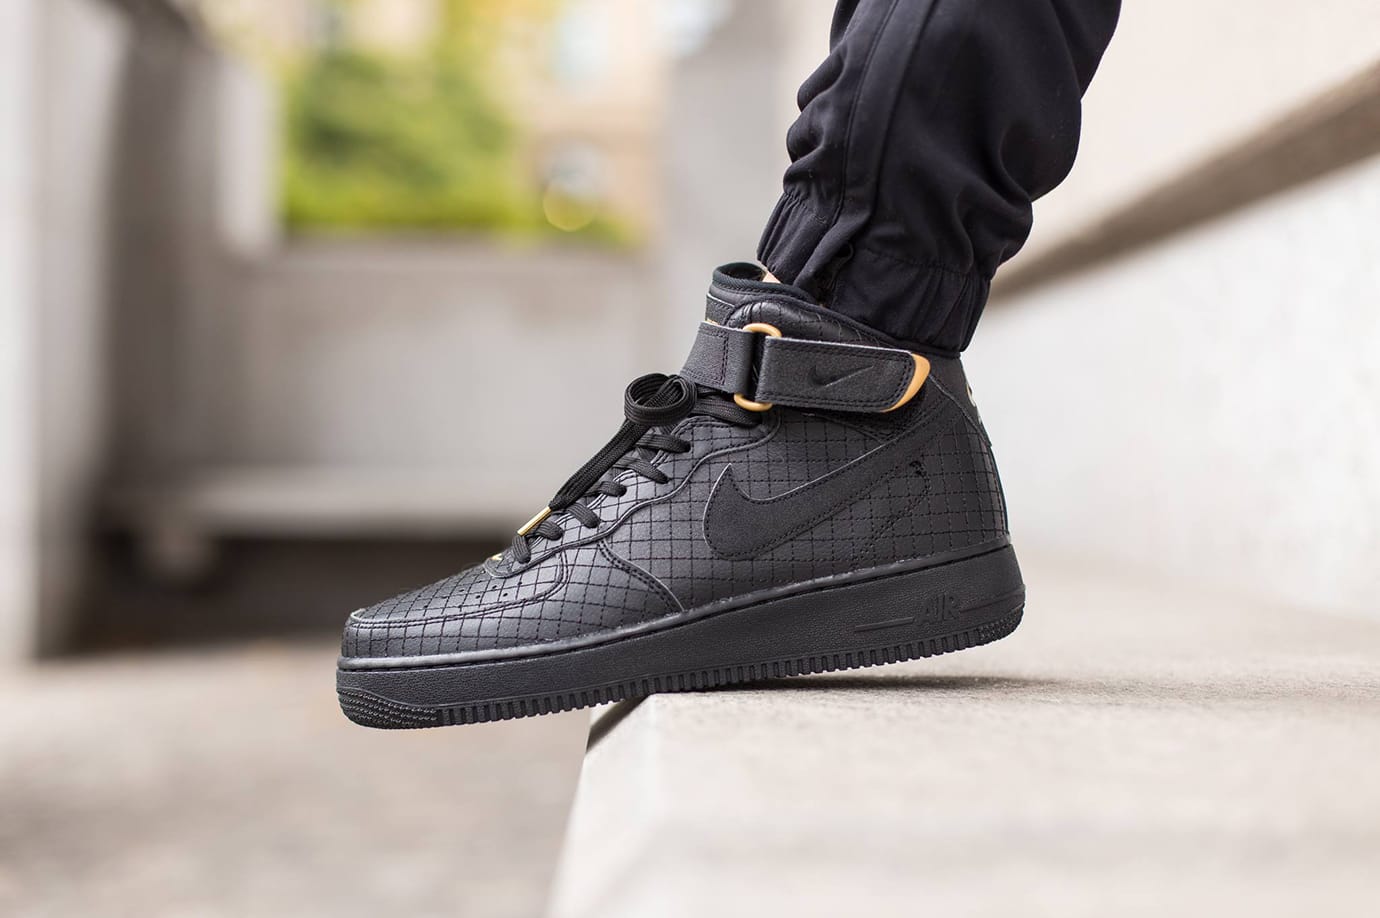 nike air force 1 mid lv8 leather casual shoes